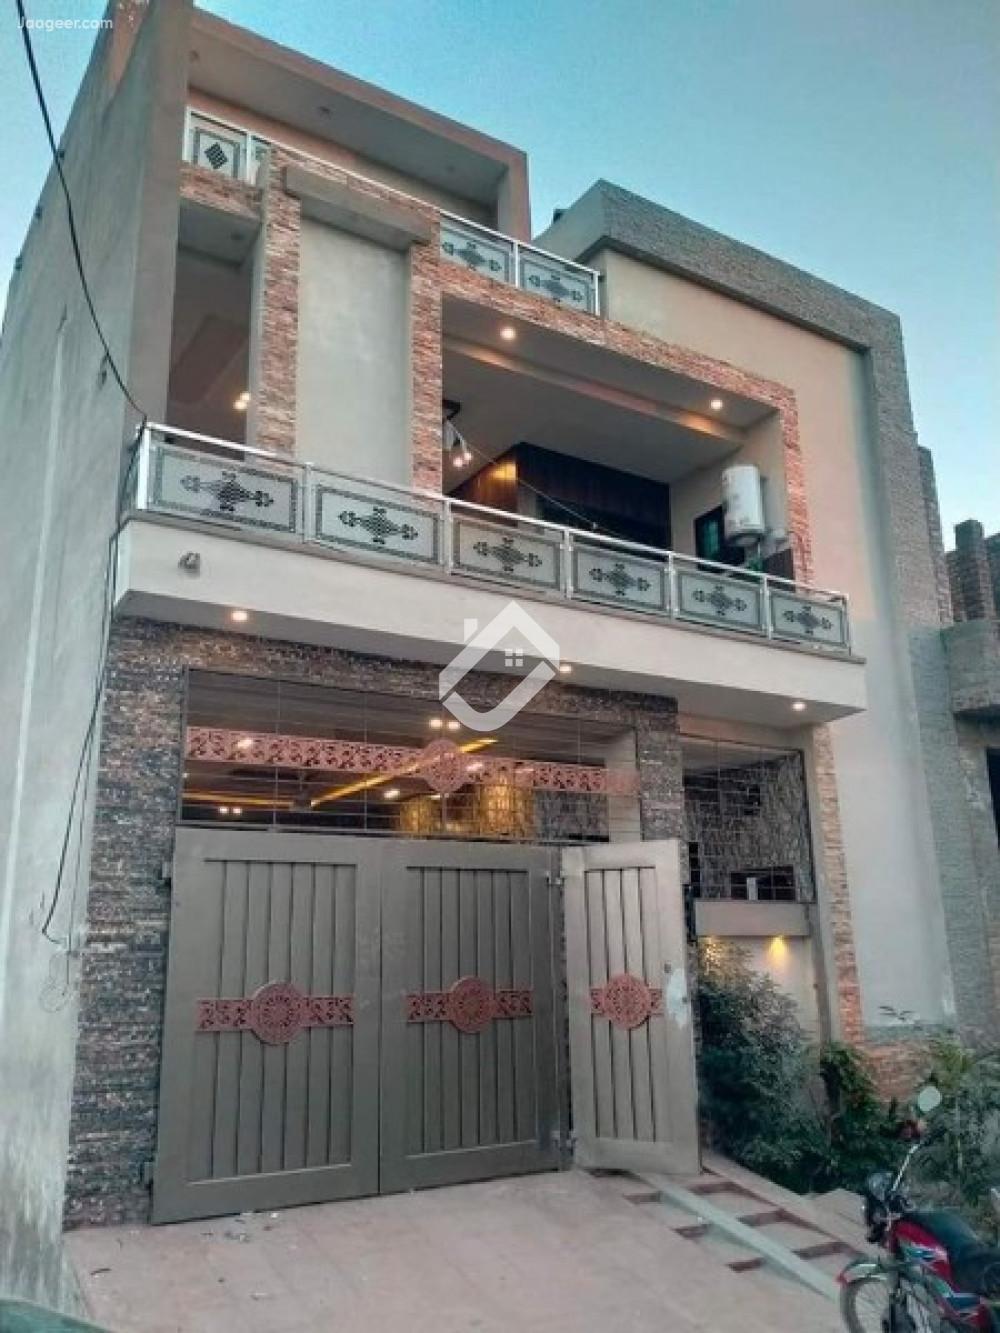 Main image 5 Marla Double Storey House For Sale In Model City Near LGS School Link PAF Road  Link PAF raod